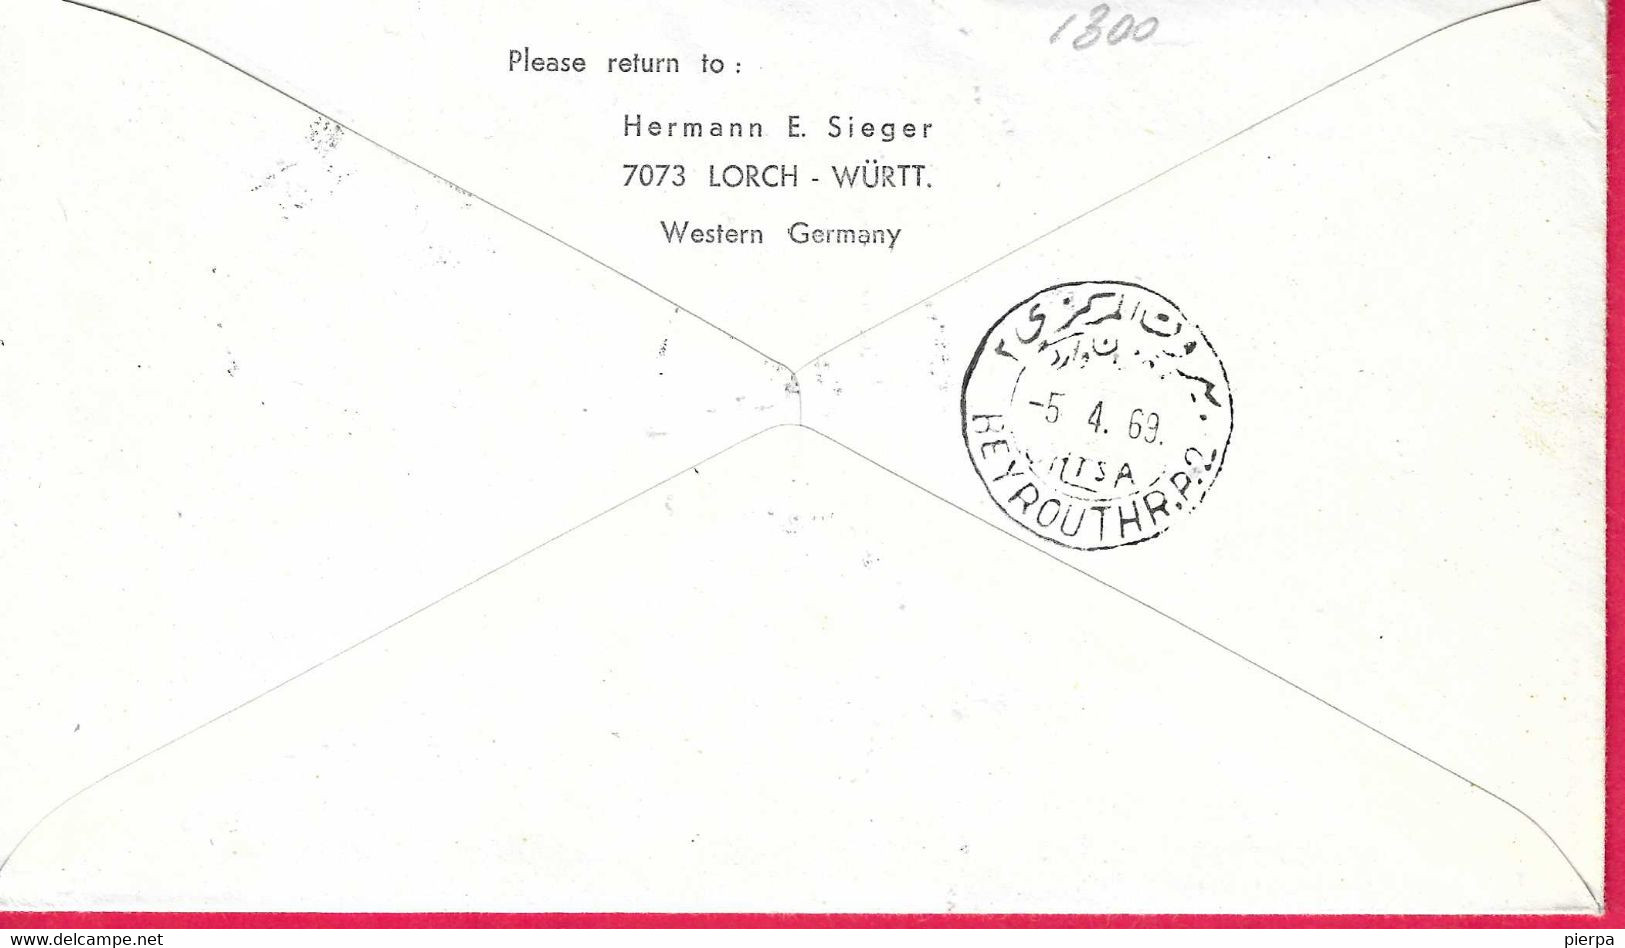 TURCHIA - FIRST FLIGHT BOING JET FROM ISTANBUL TO BEIRUT * 4.4.69* ON OFFICIAL REGISTERED ENVELOPE - Luftpost